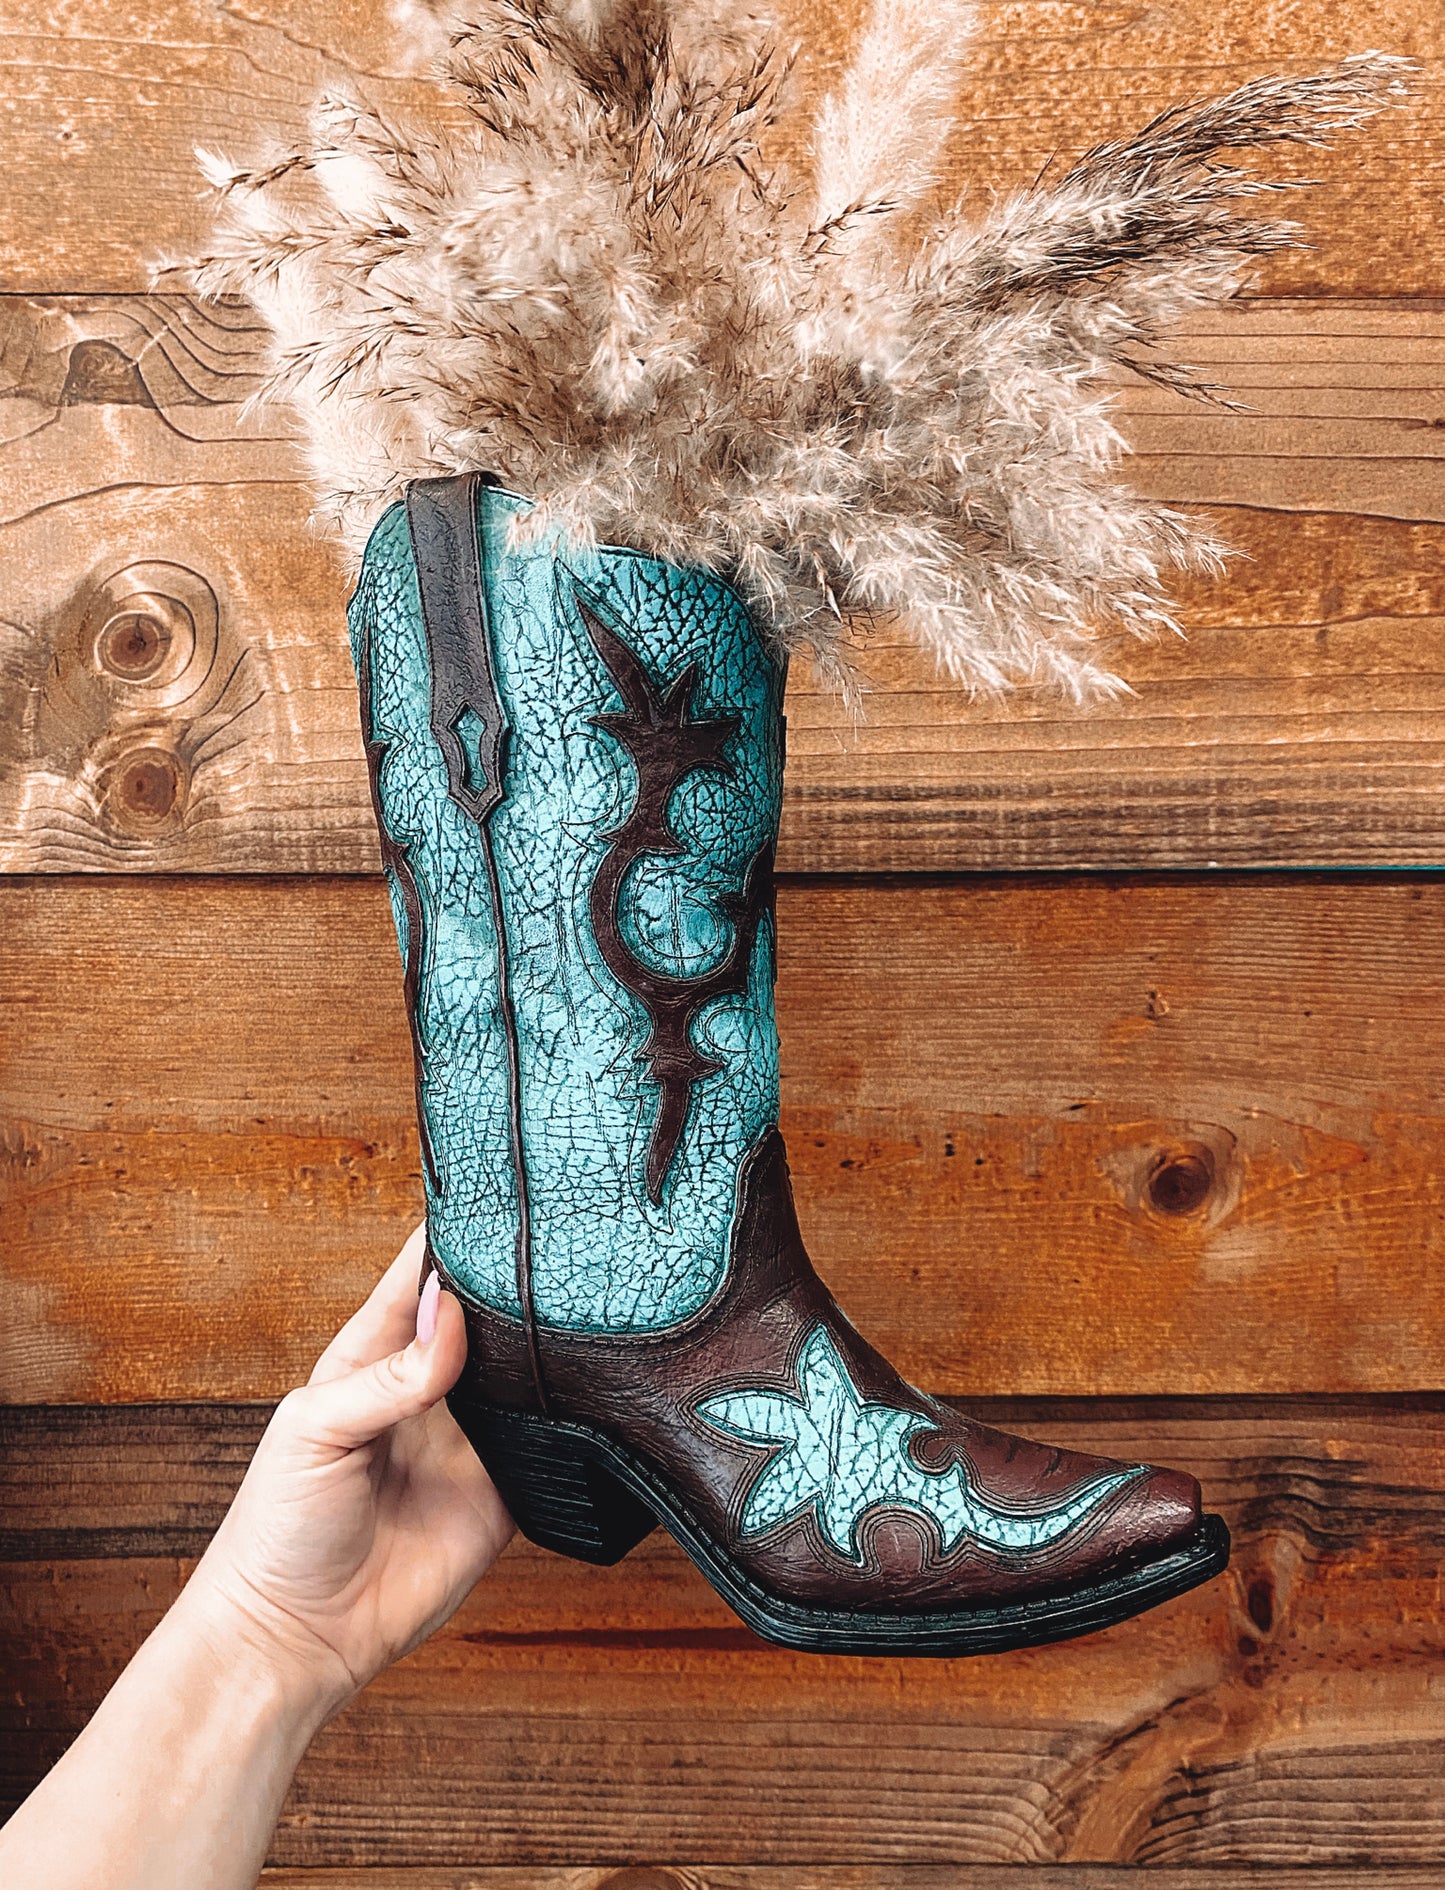 The Turquoise Cowboy Distressed Vase